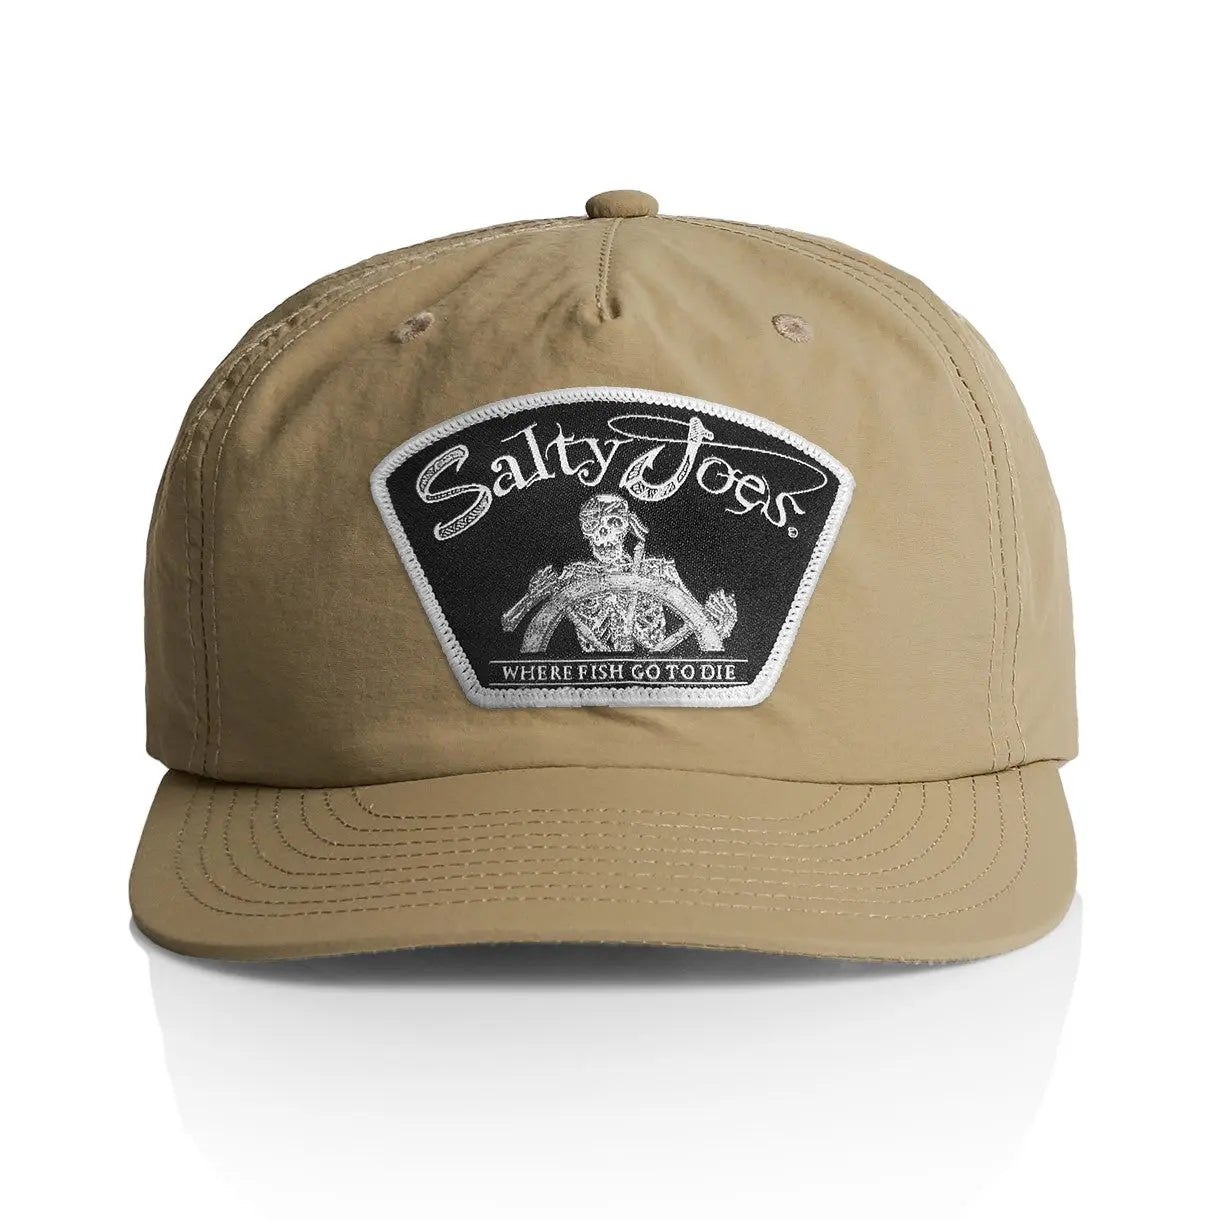 Fishing Hats - Shop Our Wide Variety of Hats Built For Fishing – Salty Joe's